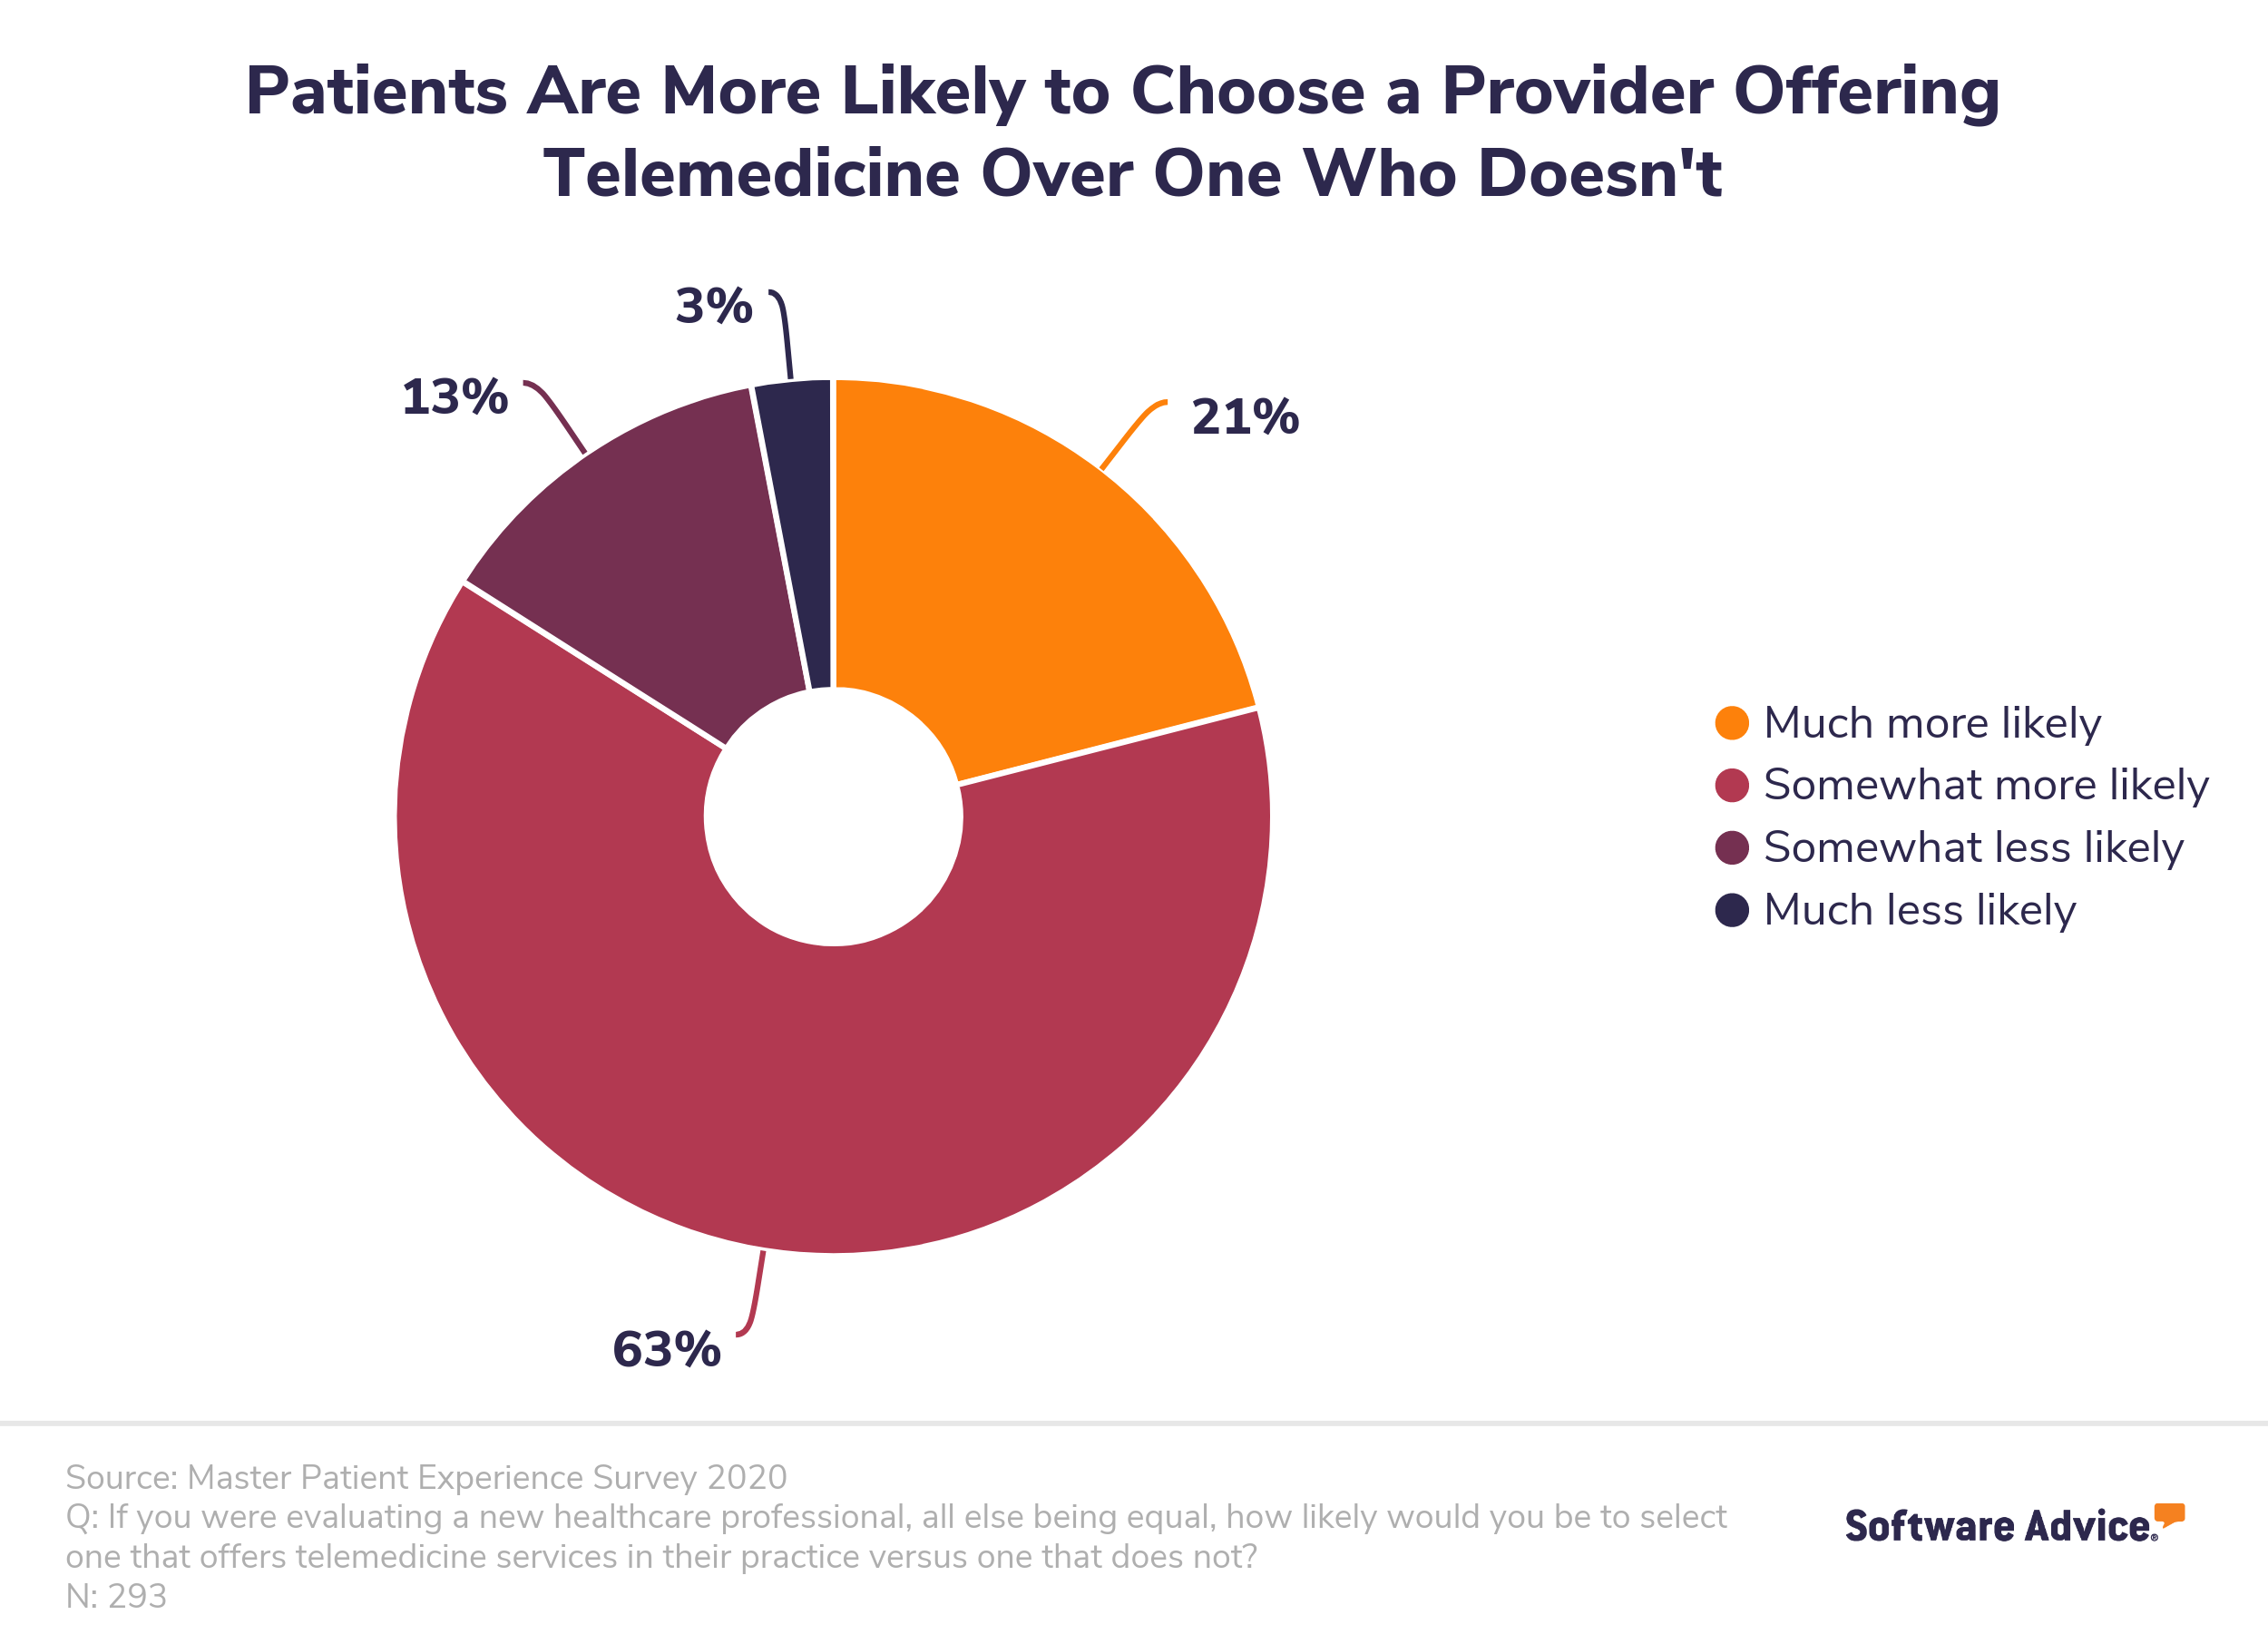 Patients-are-likely-to-choose-a-provider-who-offers-telemedicine-over-one-who-doesn't